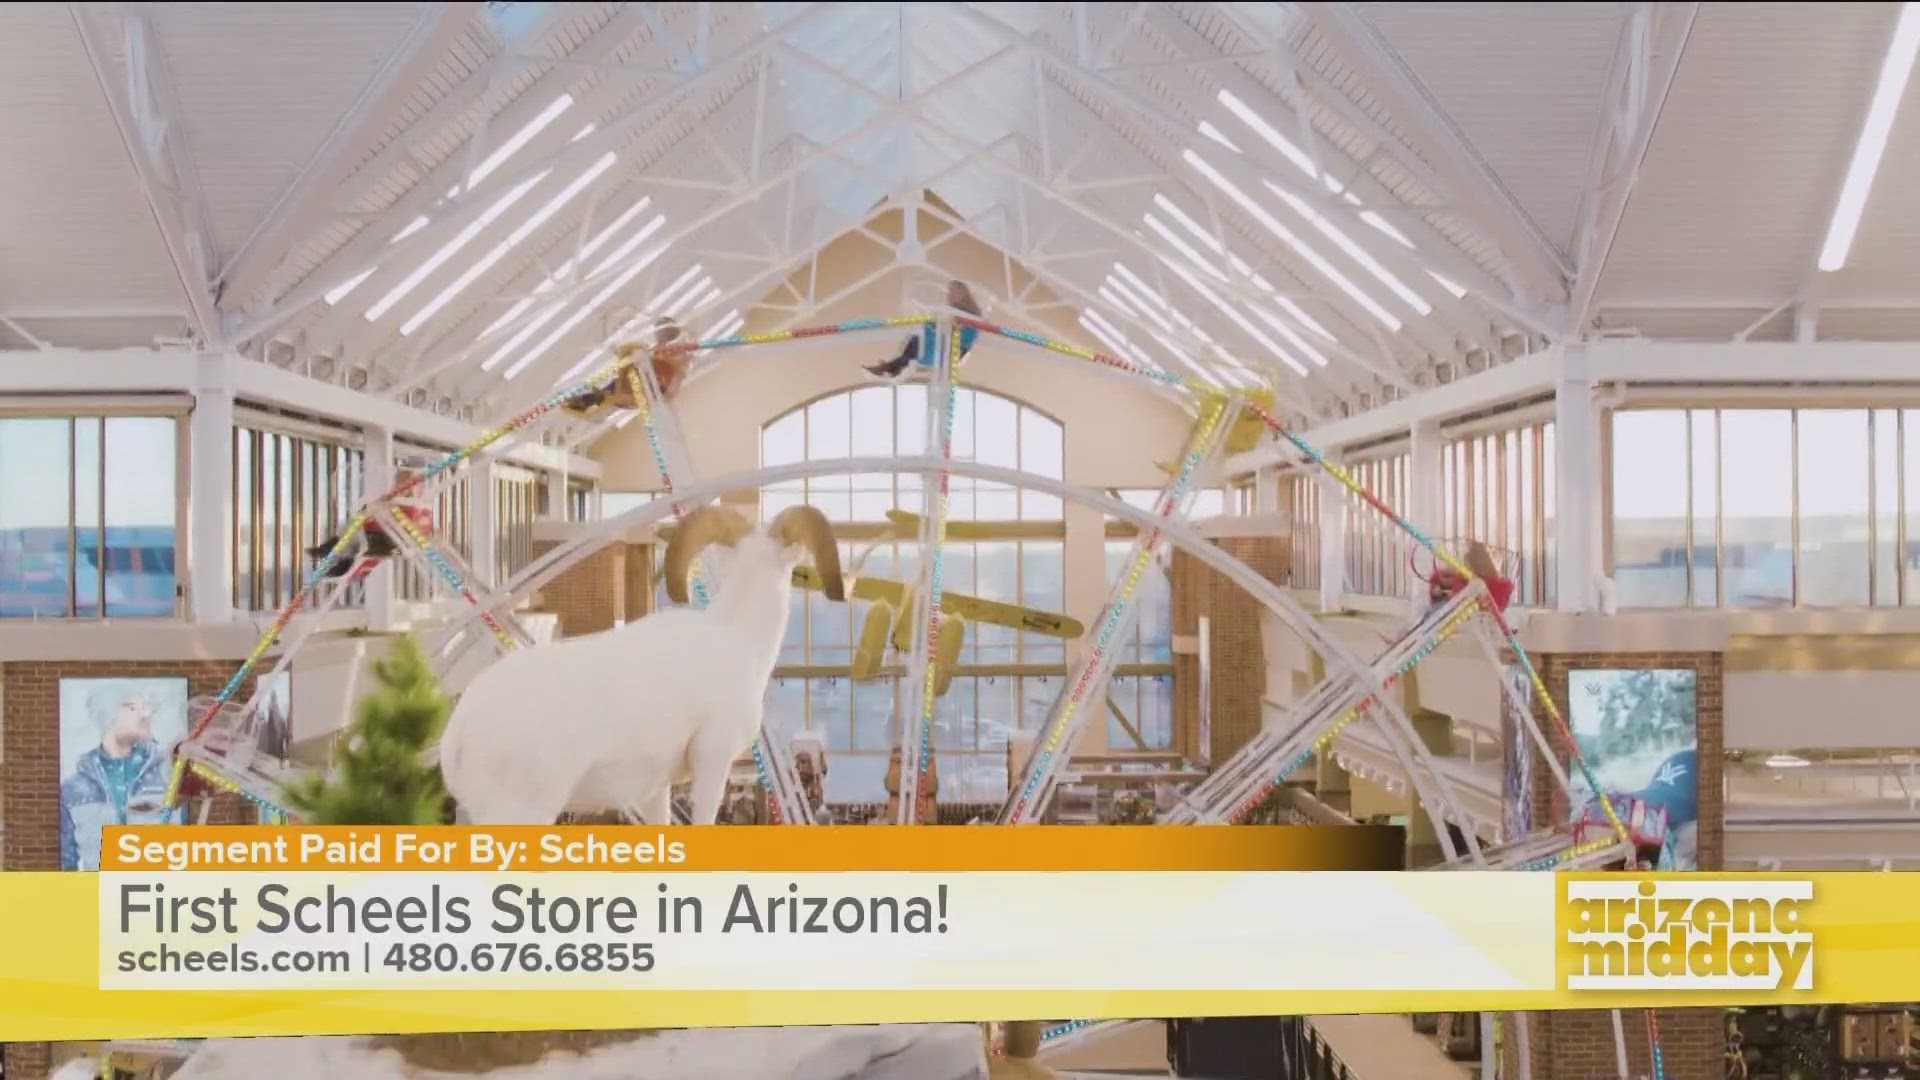 Scheels is hiring for its first Arizona location opening in the fall. It will offer sports equipment and attractions like a Ferris wheel, candy shop and aquarium.